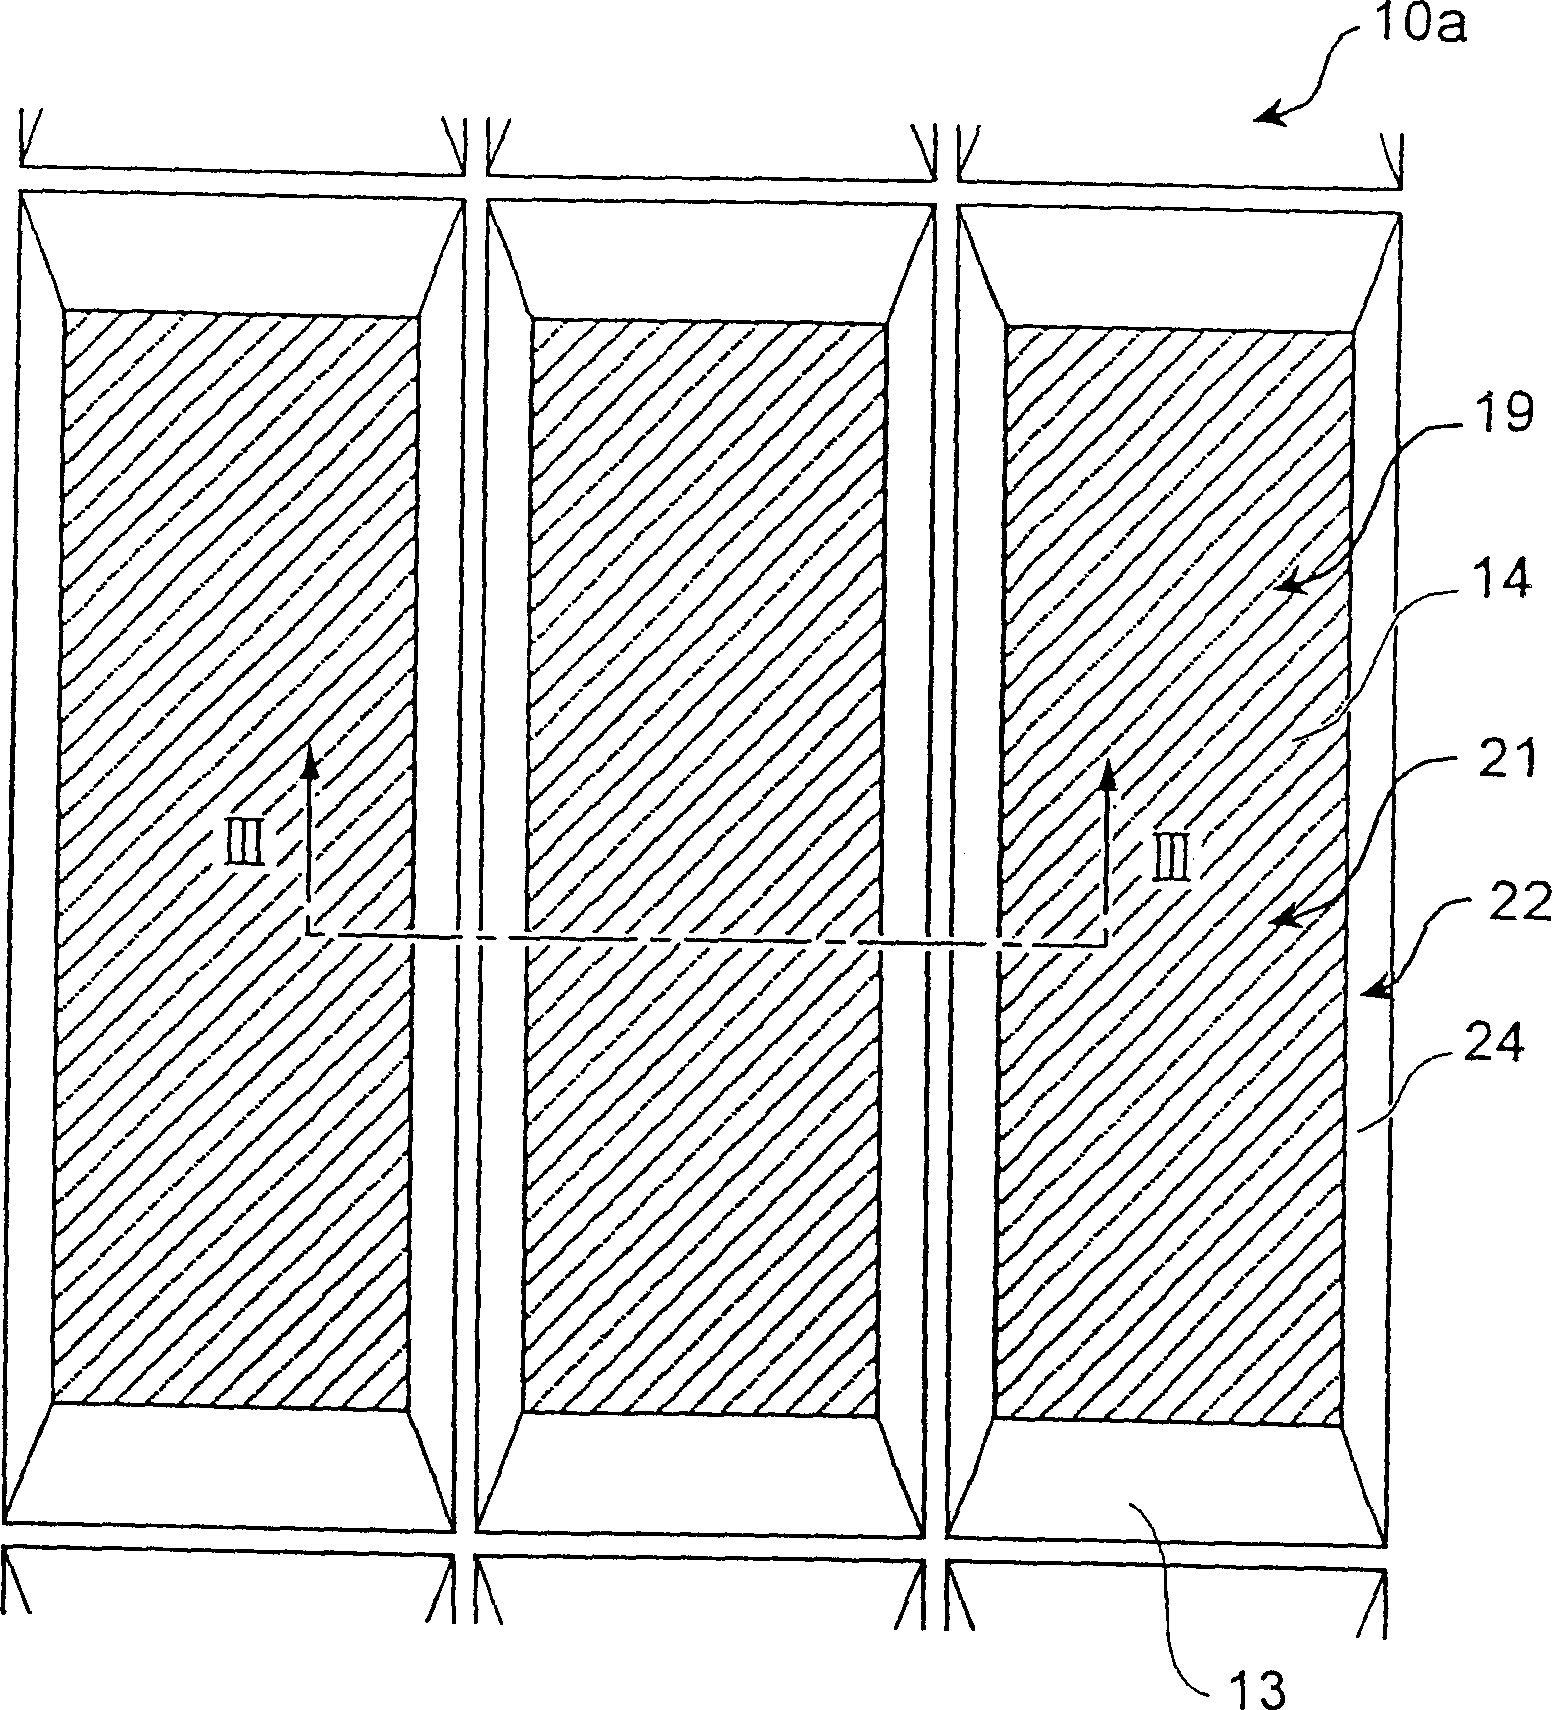 Self-illuminating element, display faceboard, method for producing display device and self-illuminating element